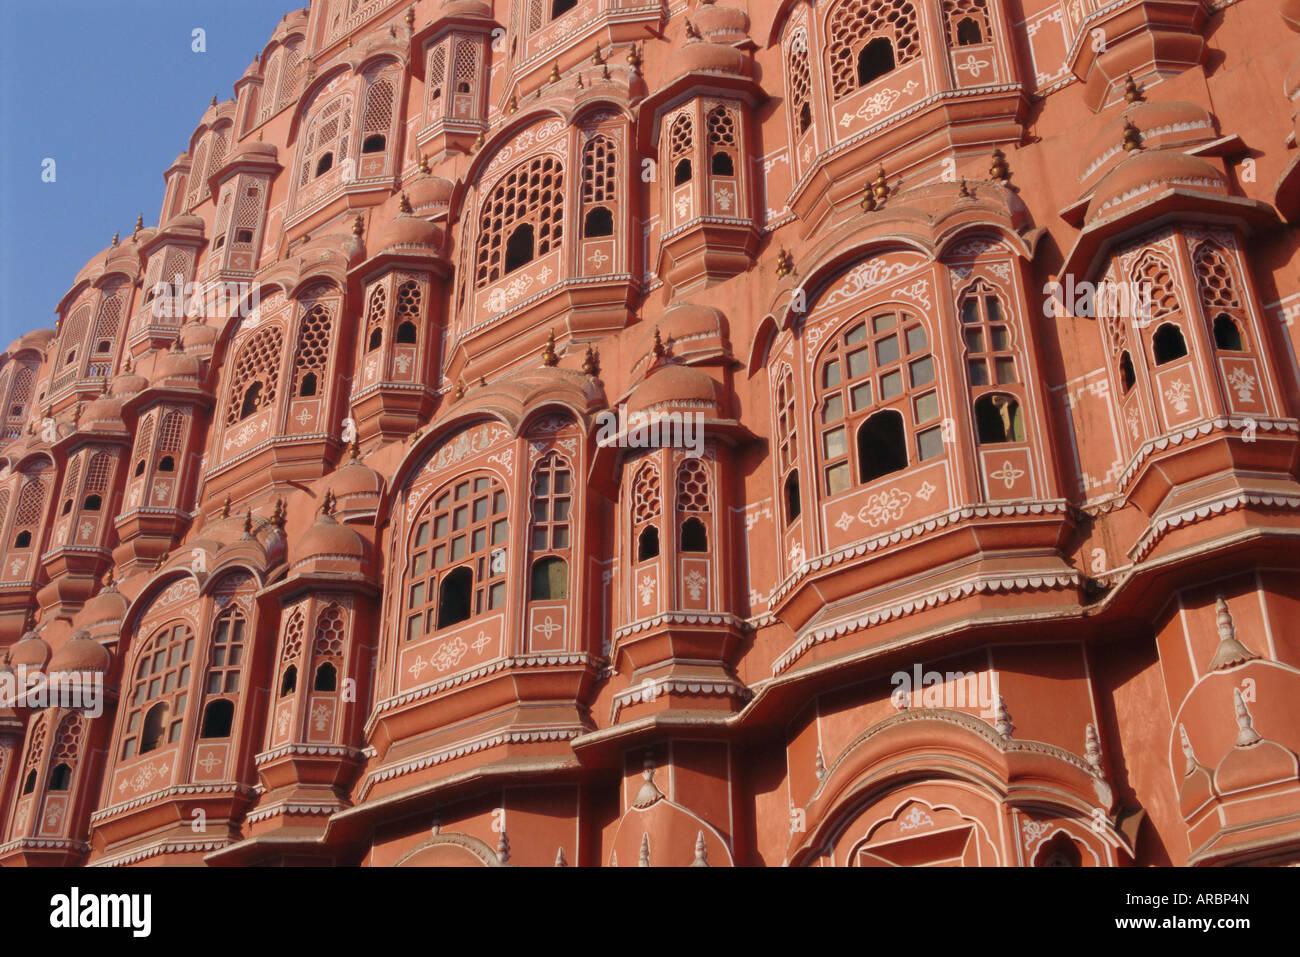 Hawa Mahal, Palace of the Winds, facade from which ladies in purdah looked outside, Jaipur, Rajasthan, India Stock Photo